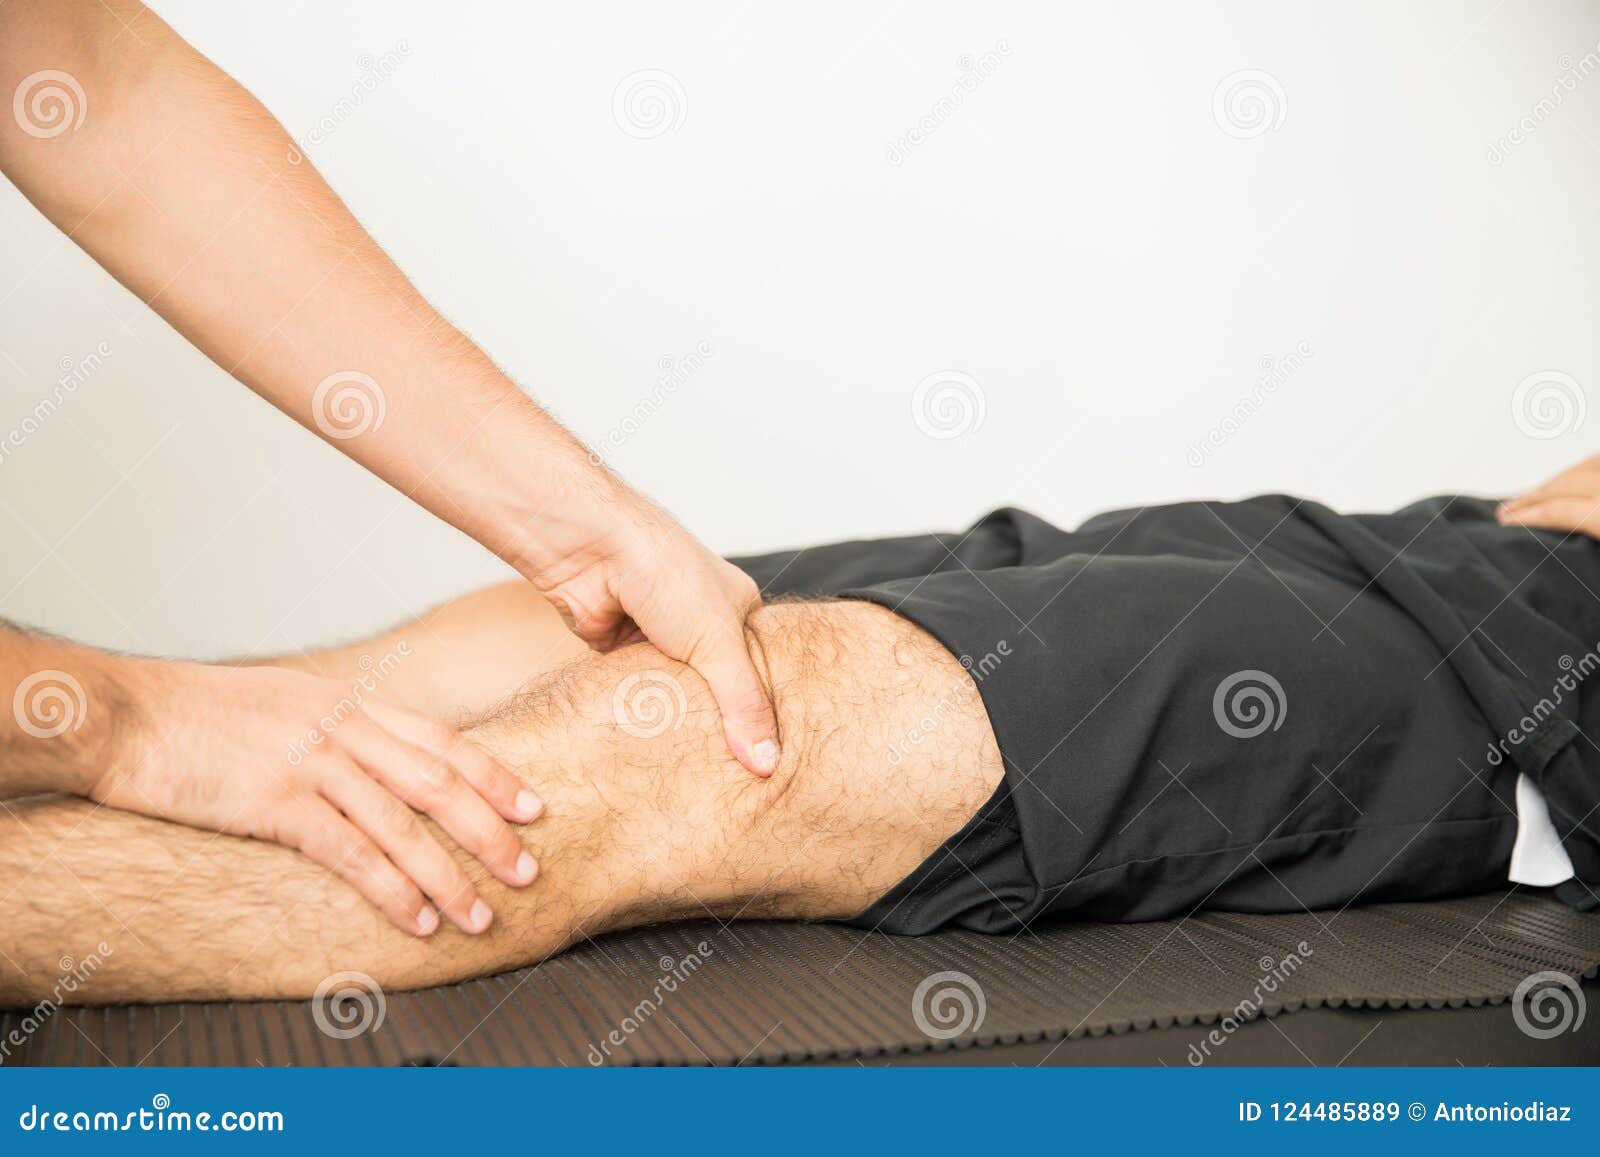 Physiotherapist Applying Pressure To Massage Young Mans Knee Stock